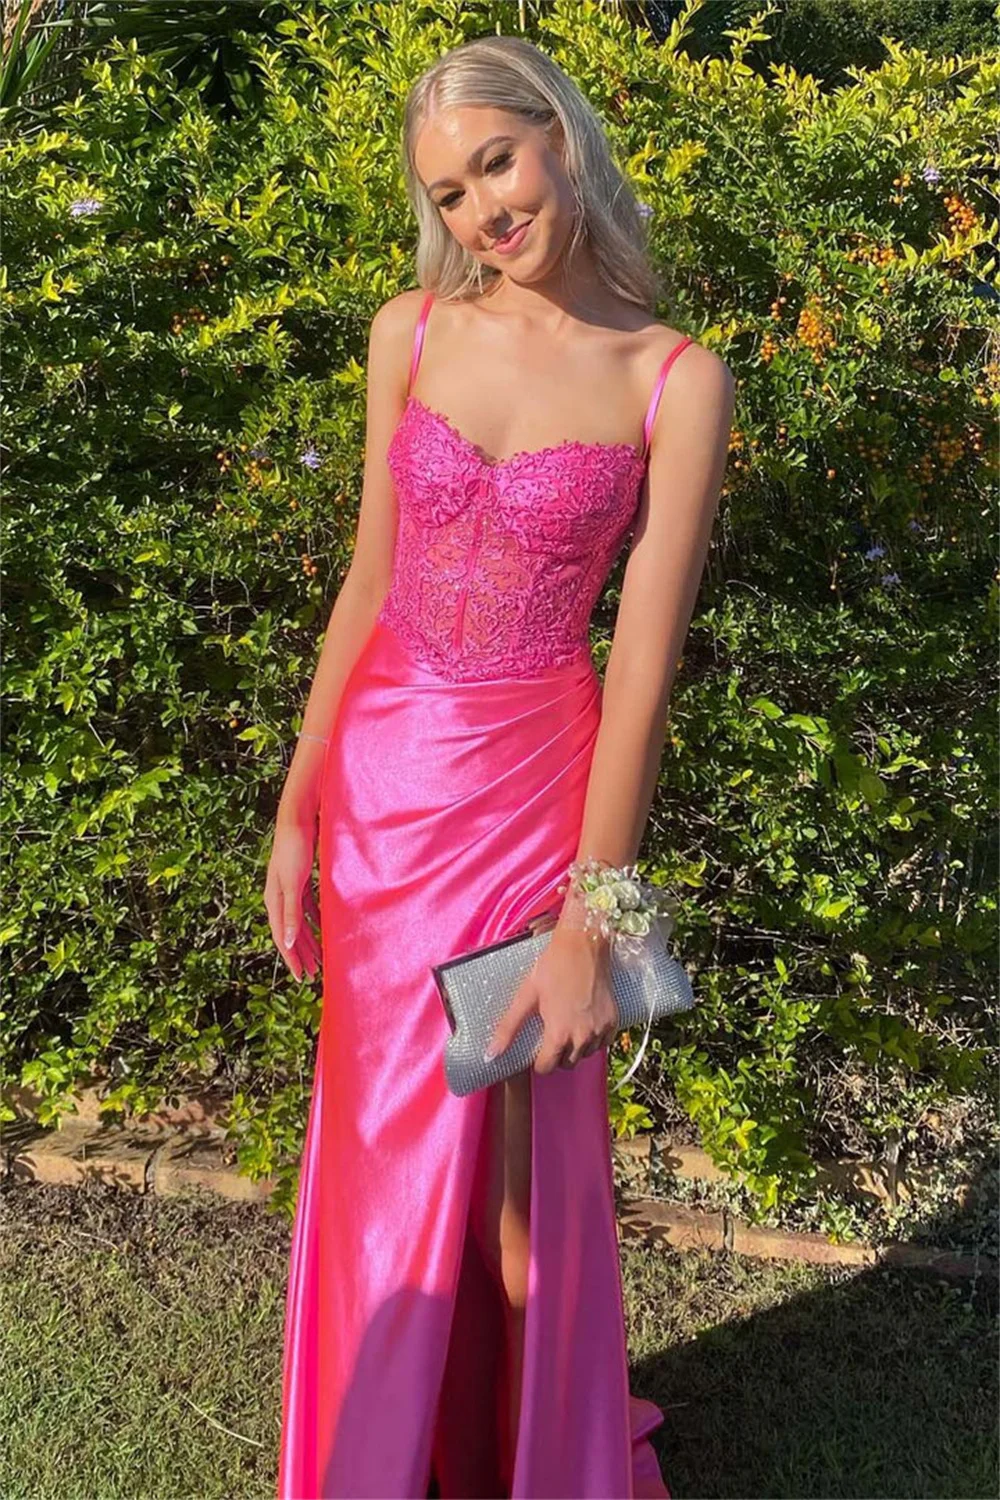 

Spaghetti Straps Strapless Mermaid Prom Dresses With Split Side Lace Appliques Sleeveless Bridesmaid Dress Long Evening Gowns